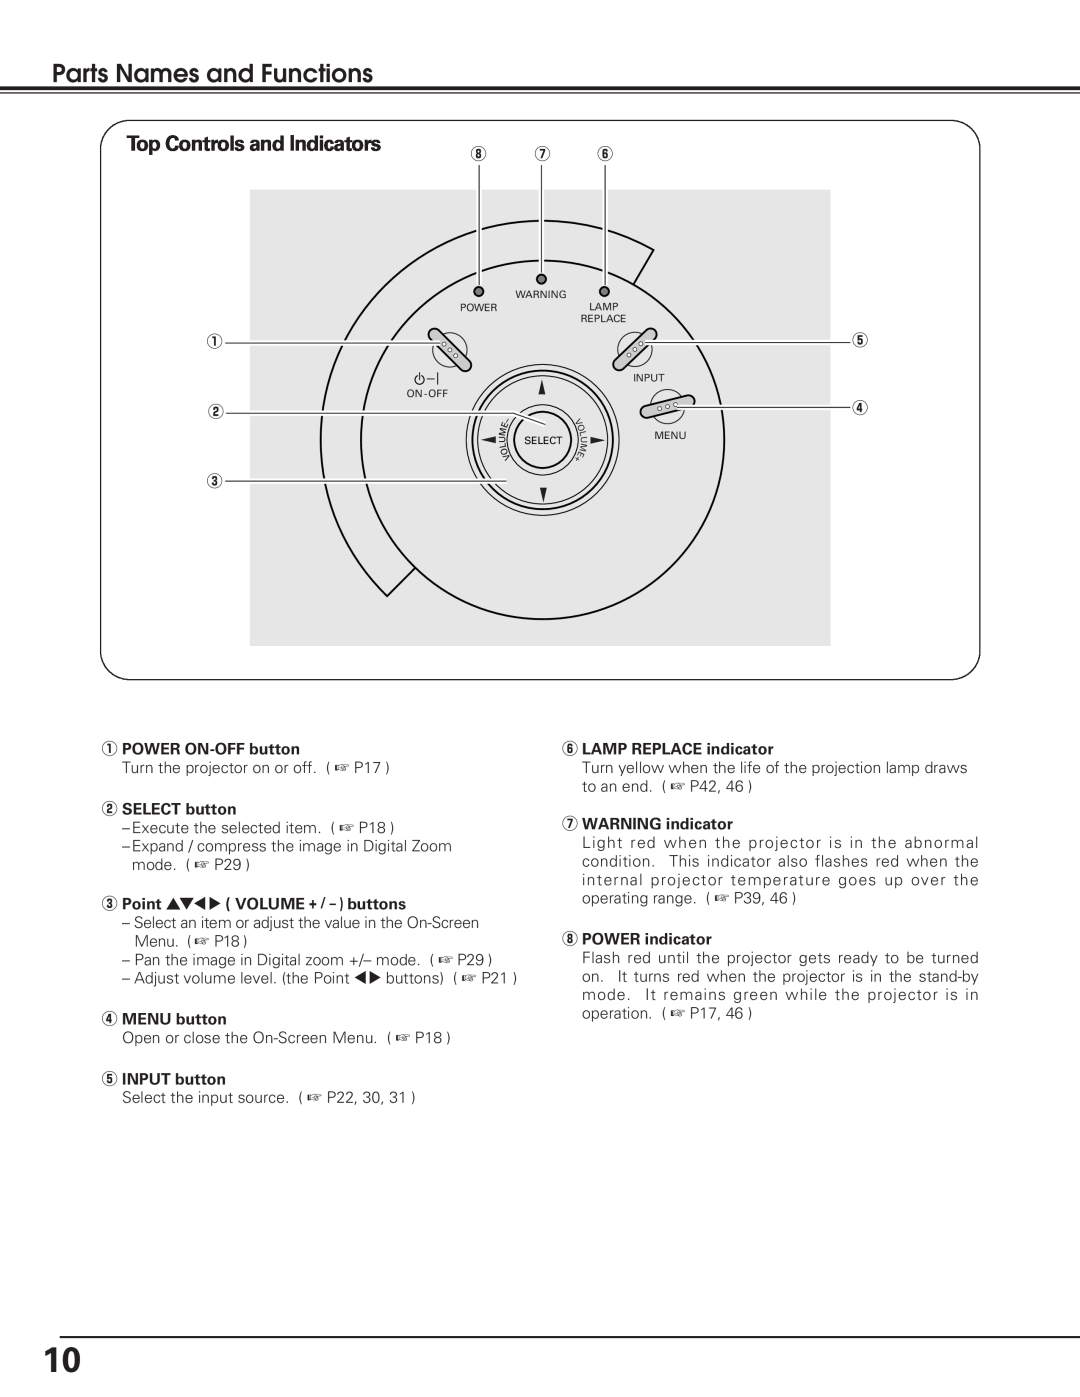 Eiki LC-SD12 owner manual Parts Names and Functions, Top Controls and Indicators 